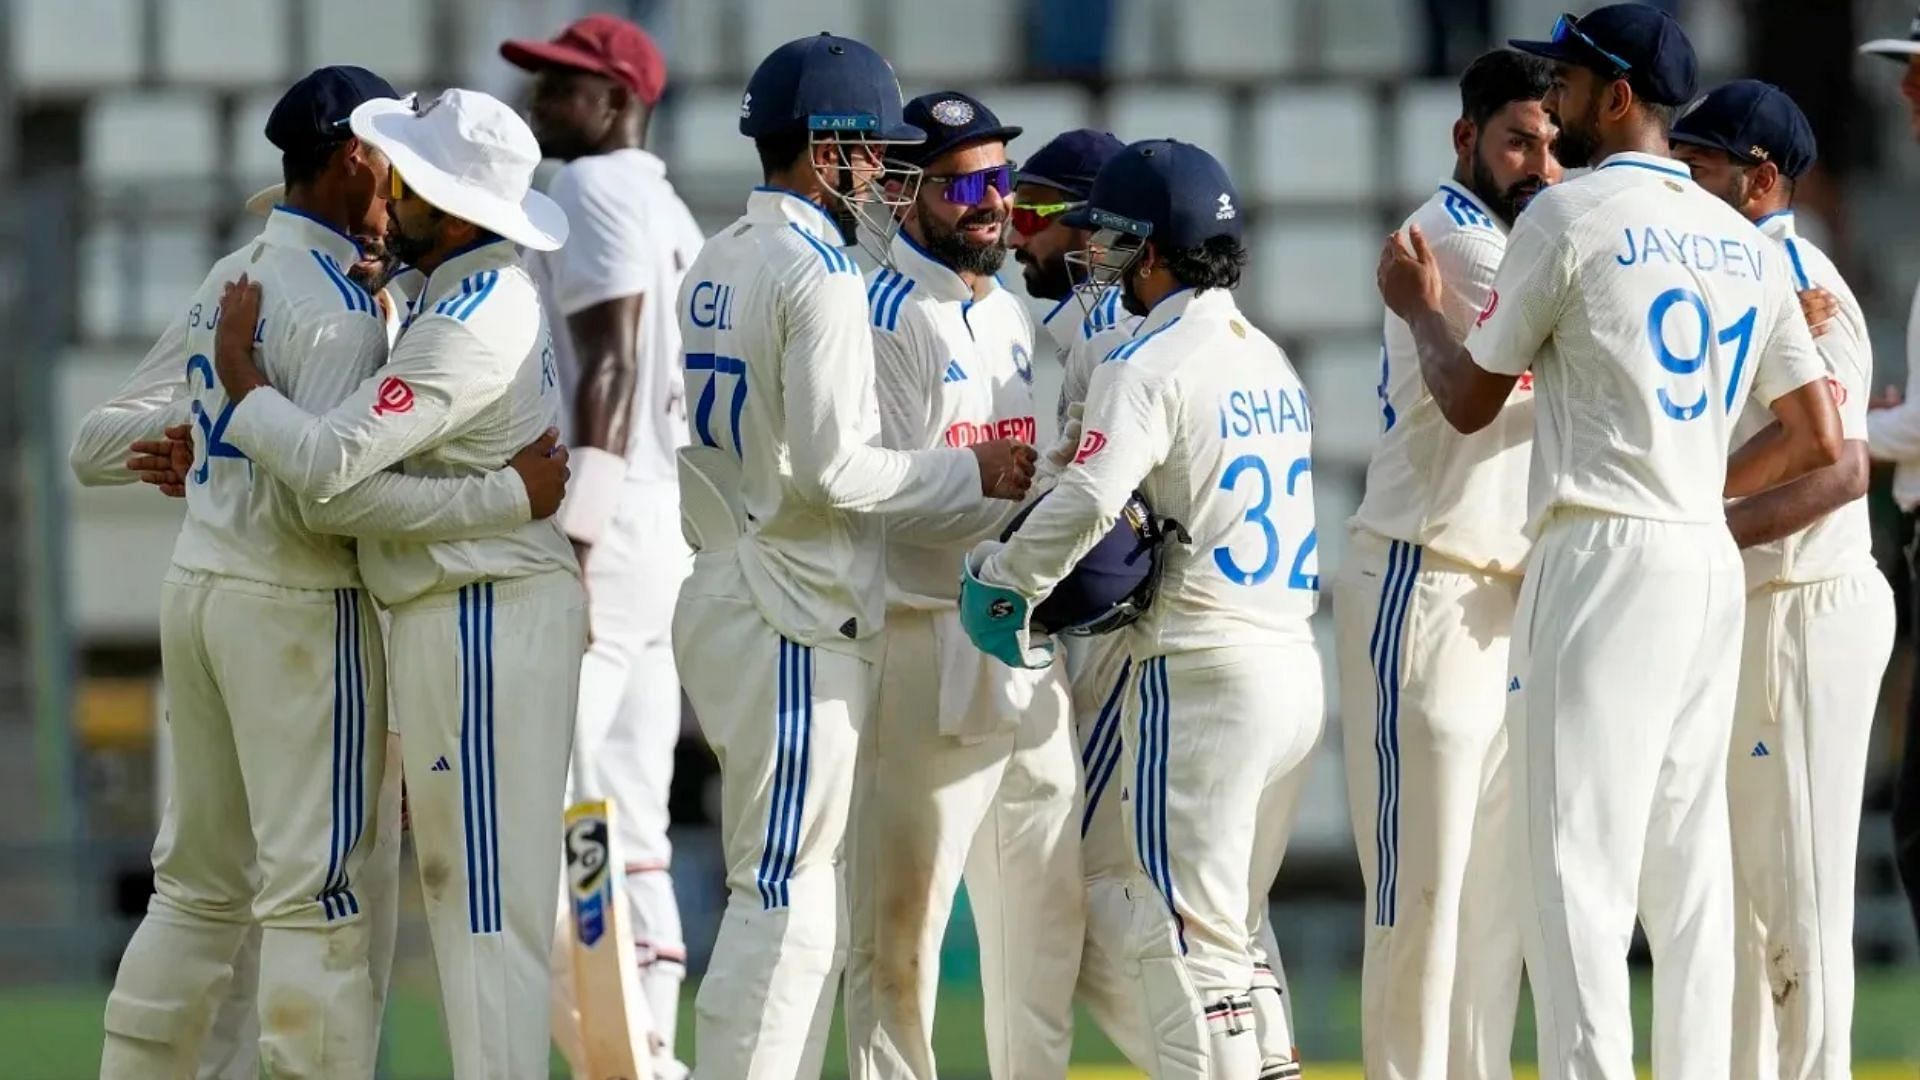 Team India are coming into the second Test on the back of a comprehensive win in Dominica (P.C.:Twitter)